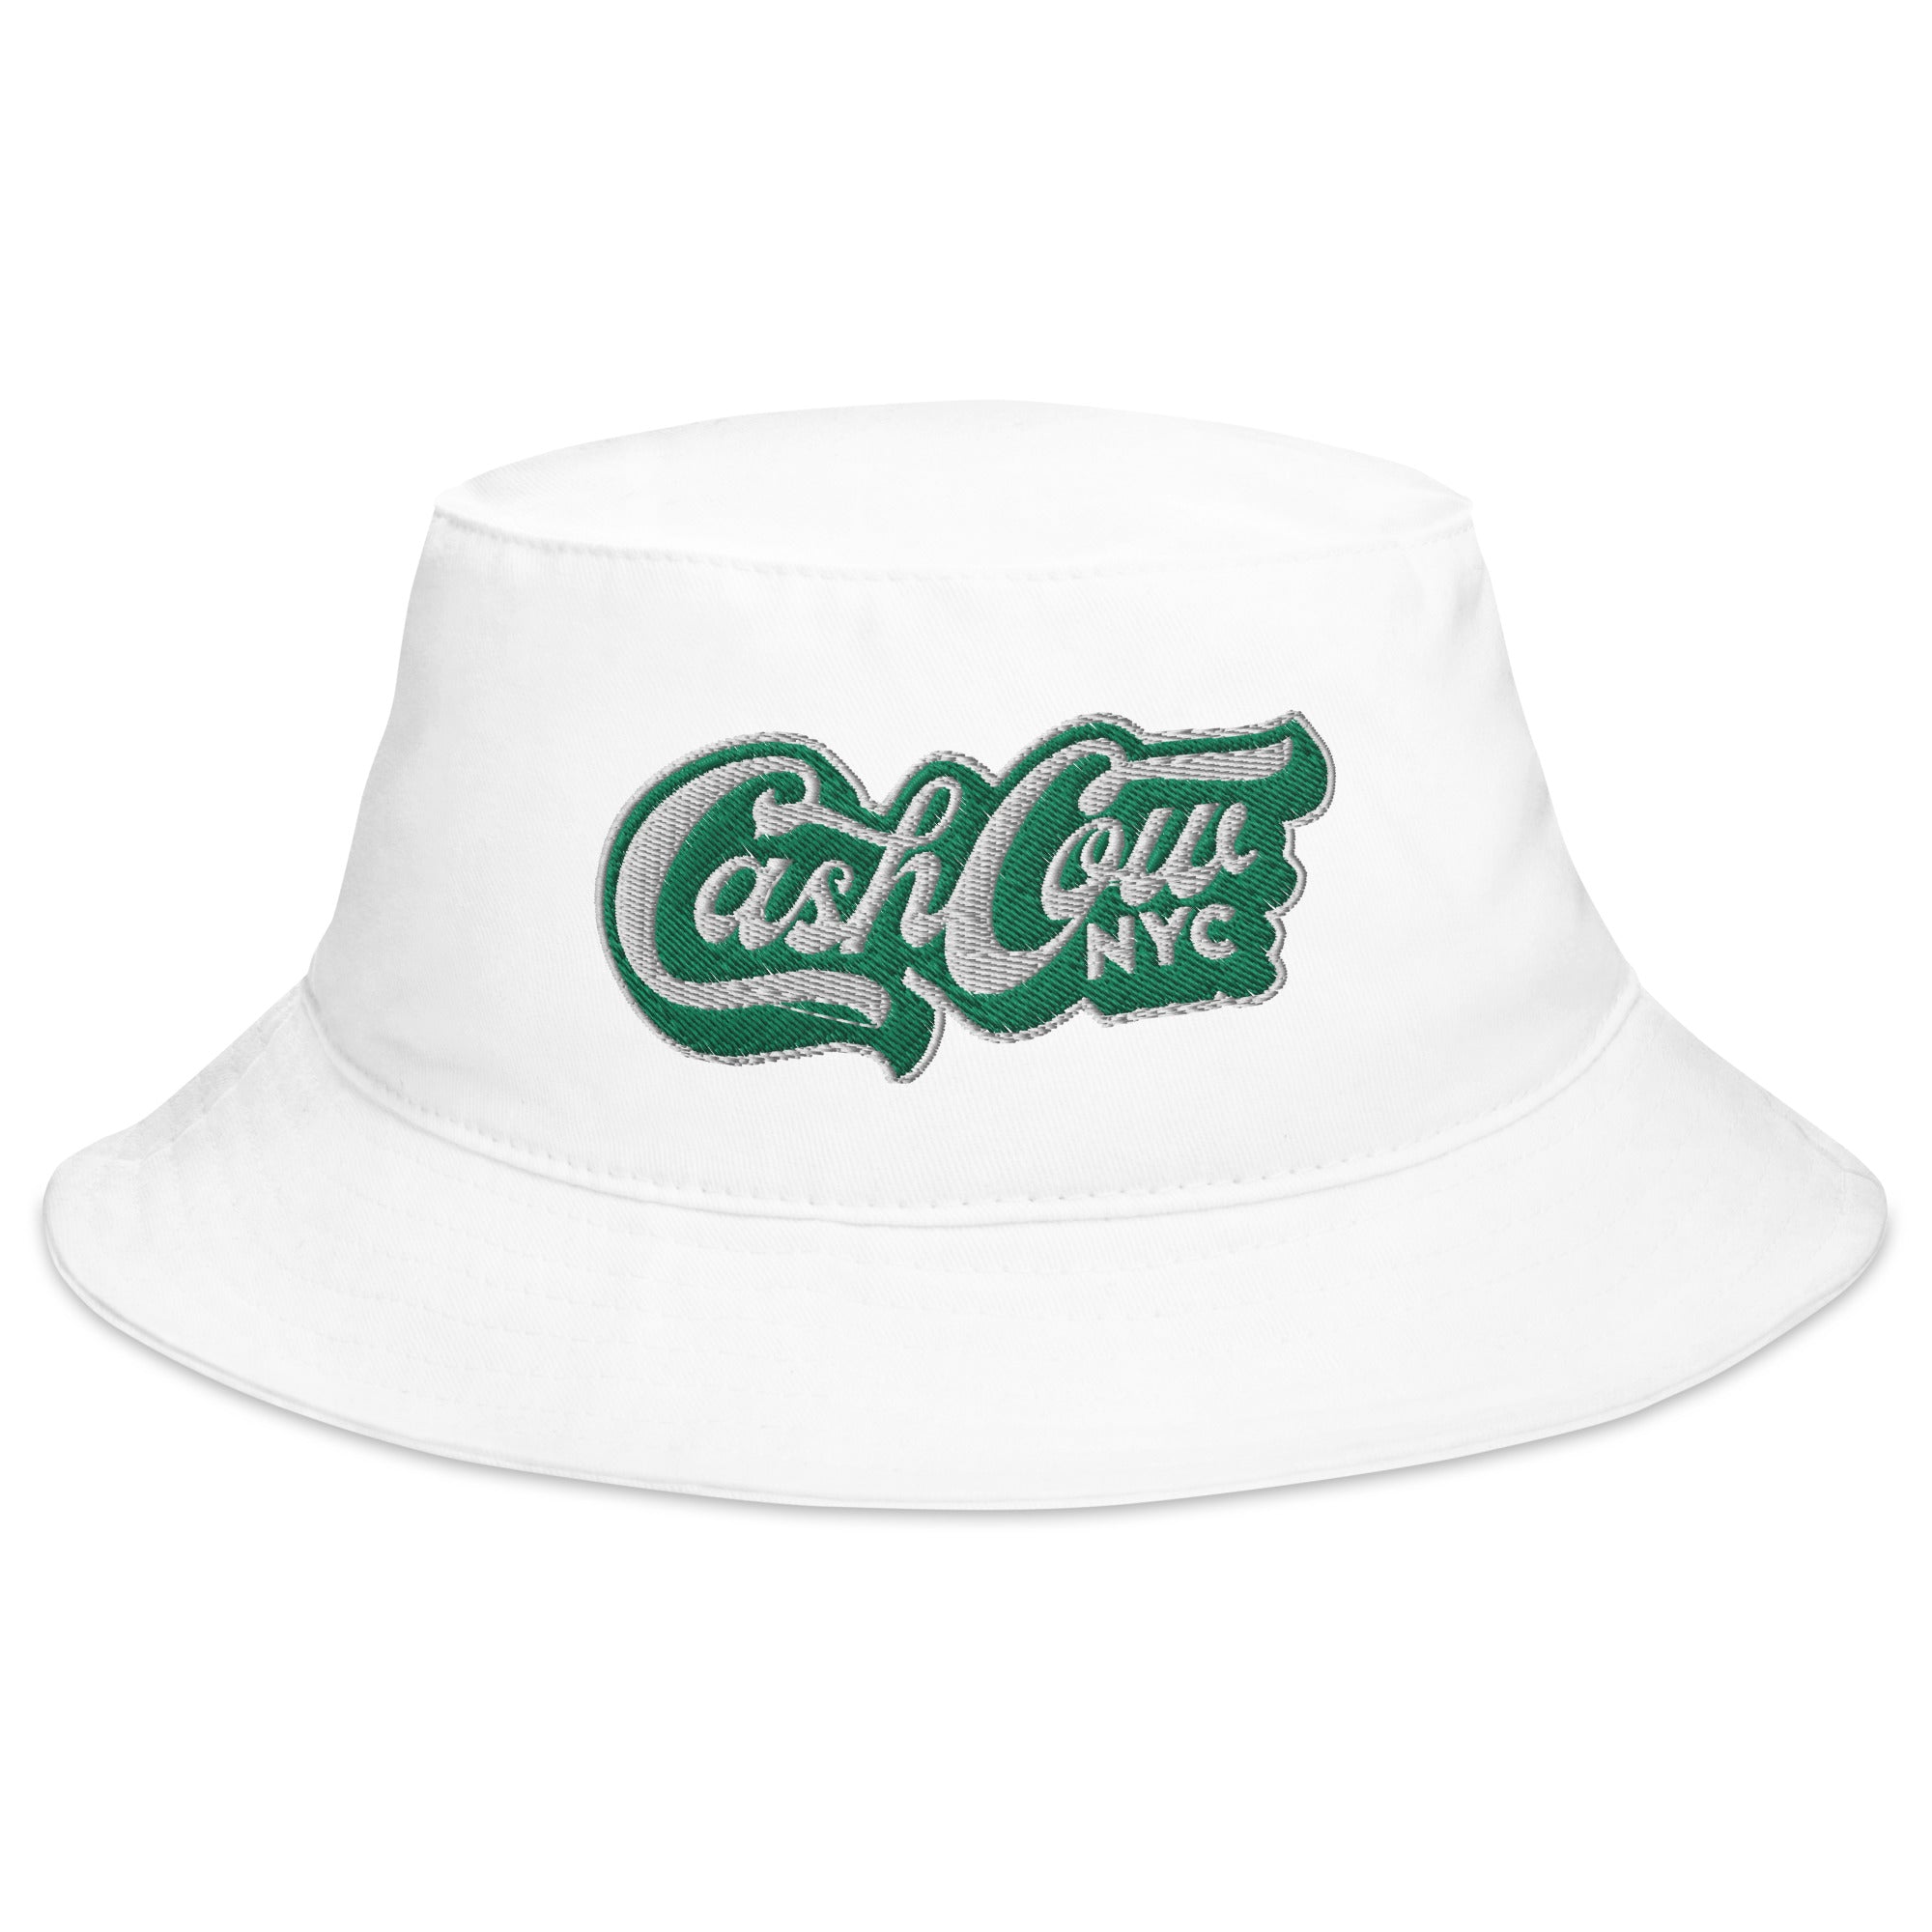 Cash Cow NYC - White Hat | Cash Cow NYC